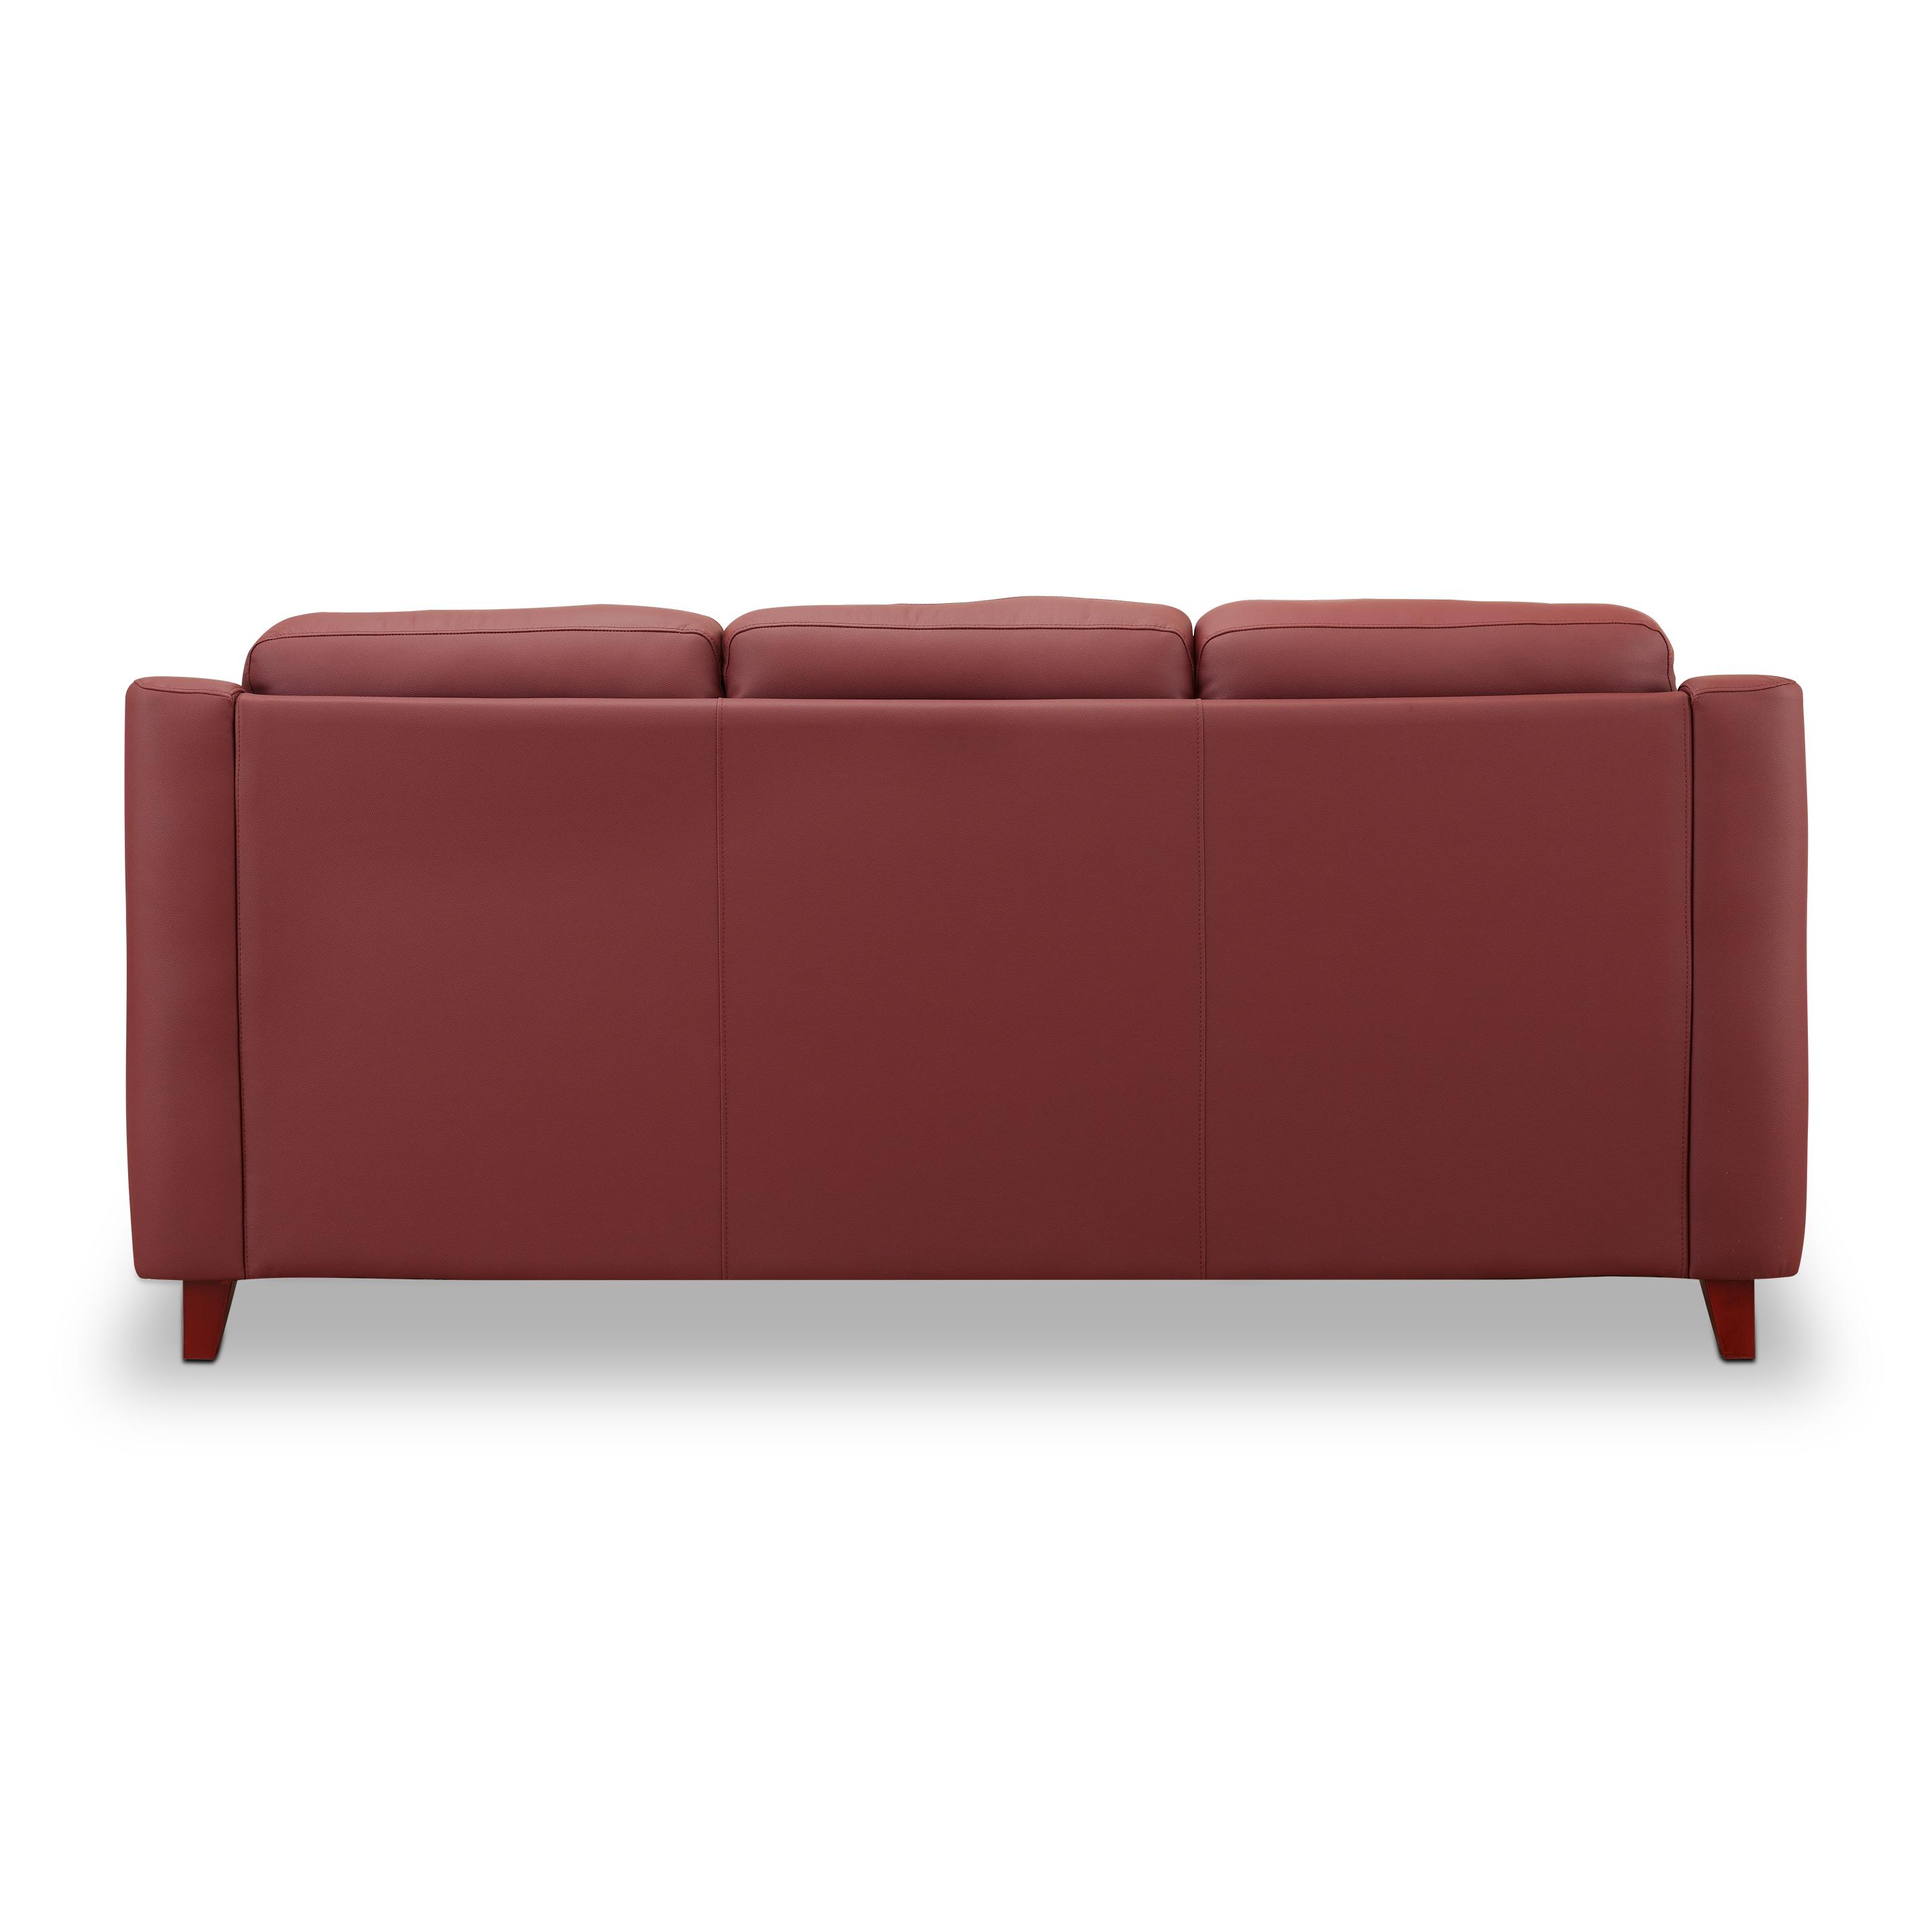 3 Seater Red Genuine Leather Sofa